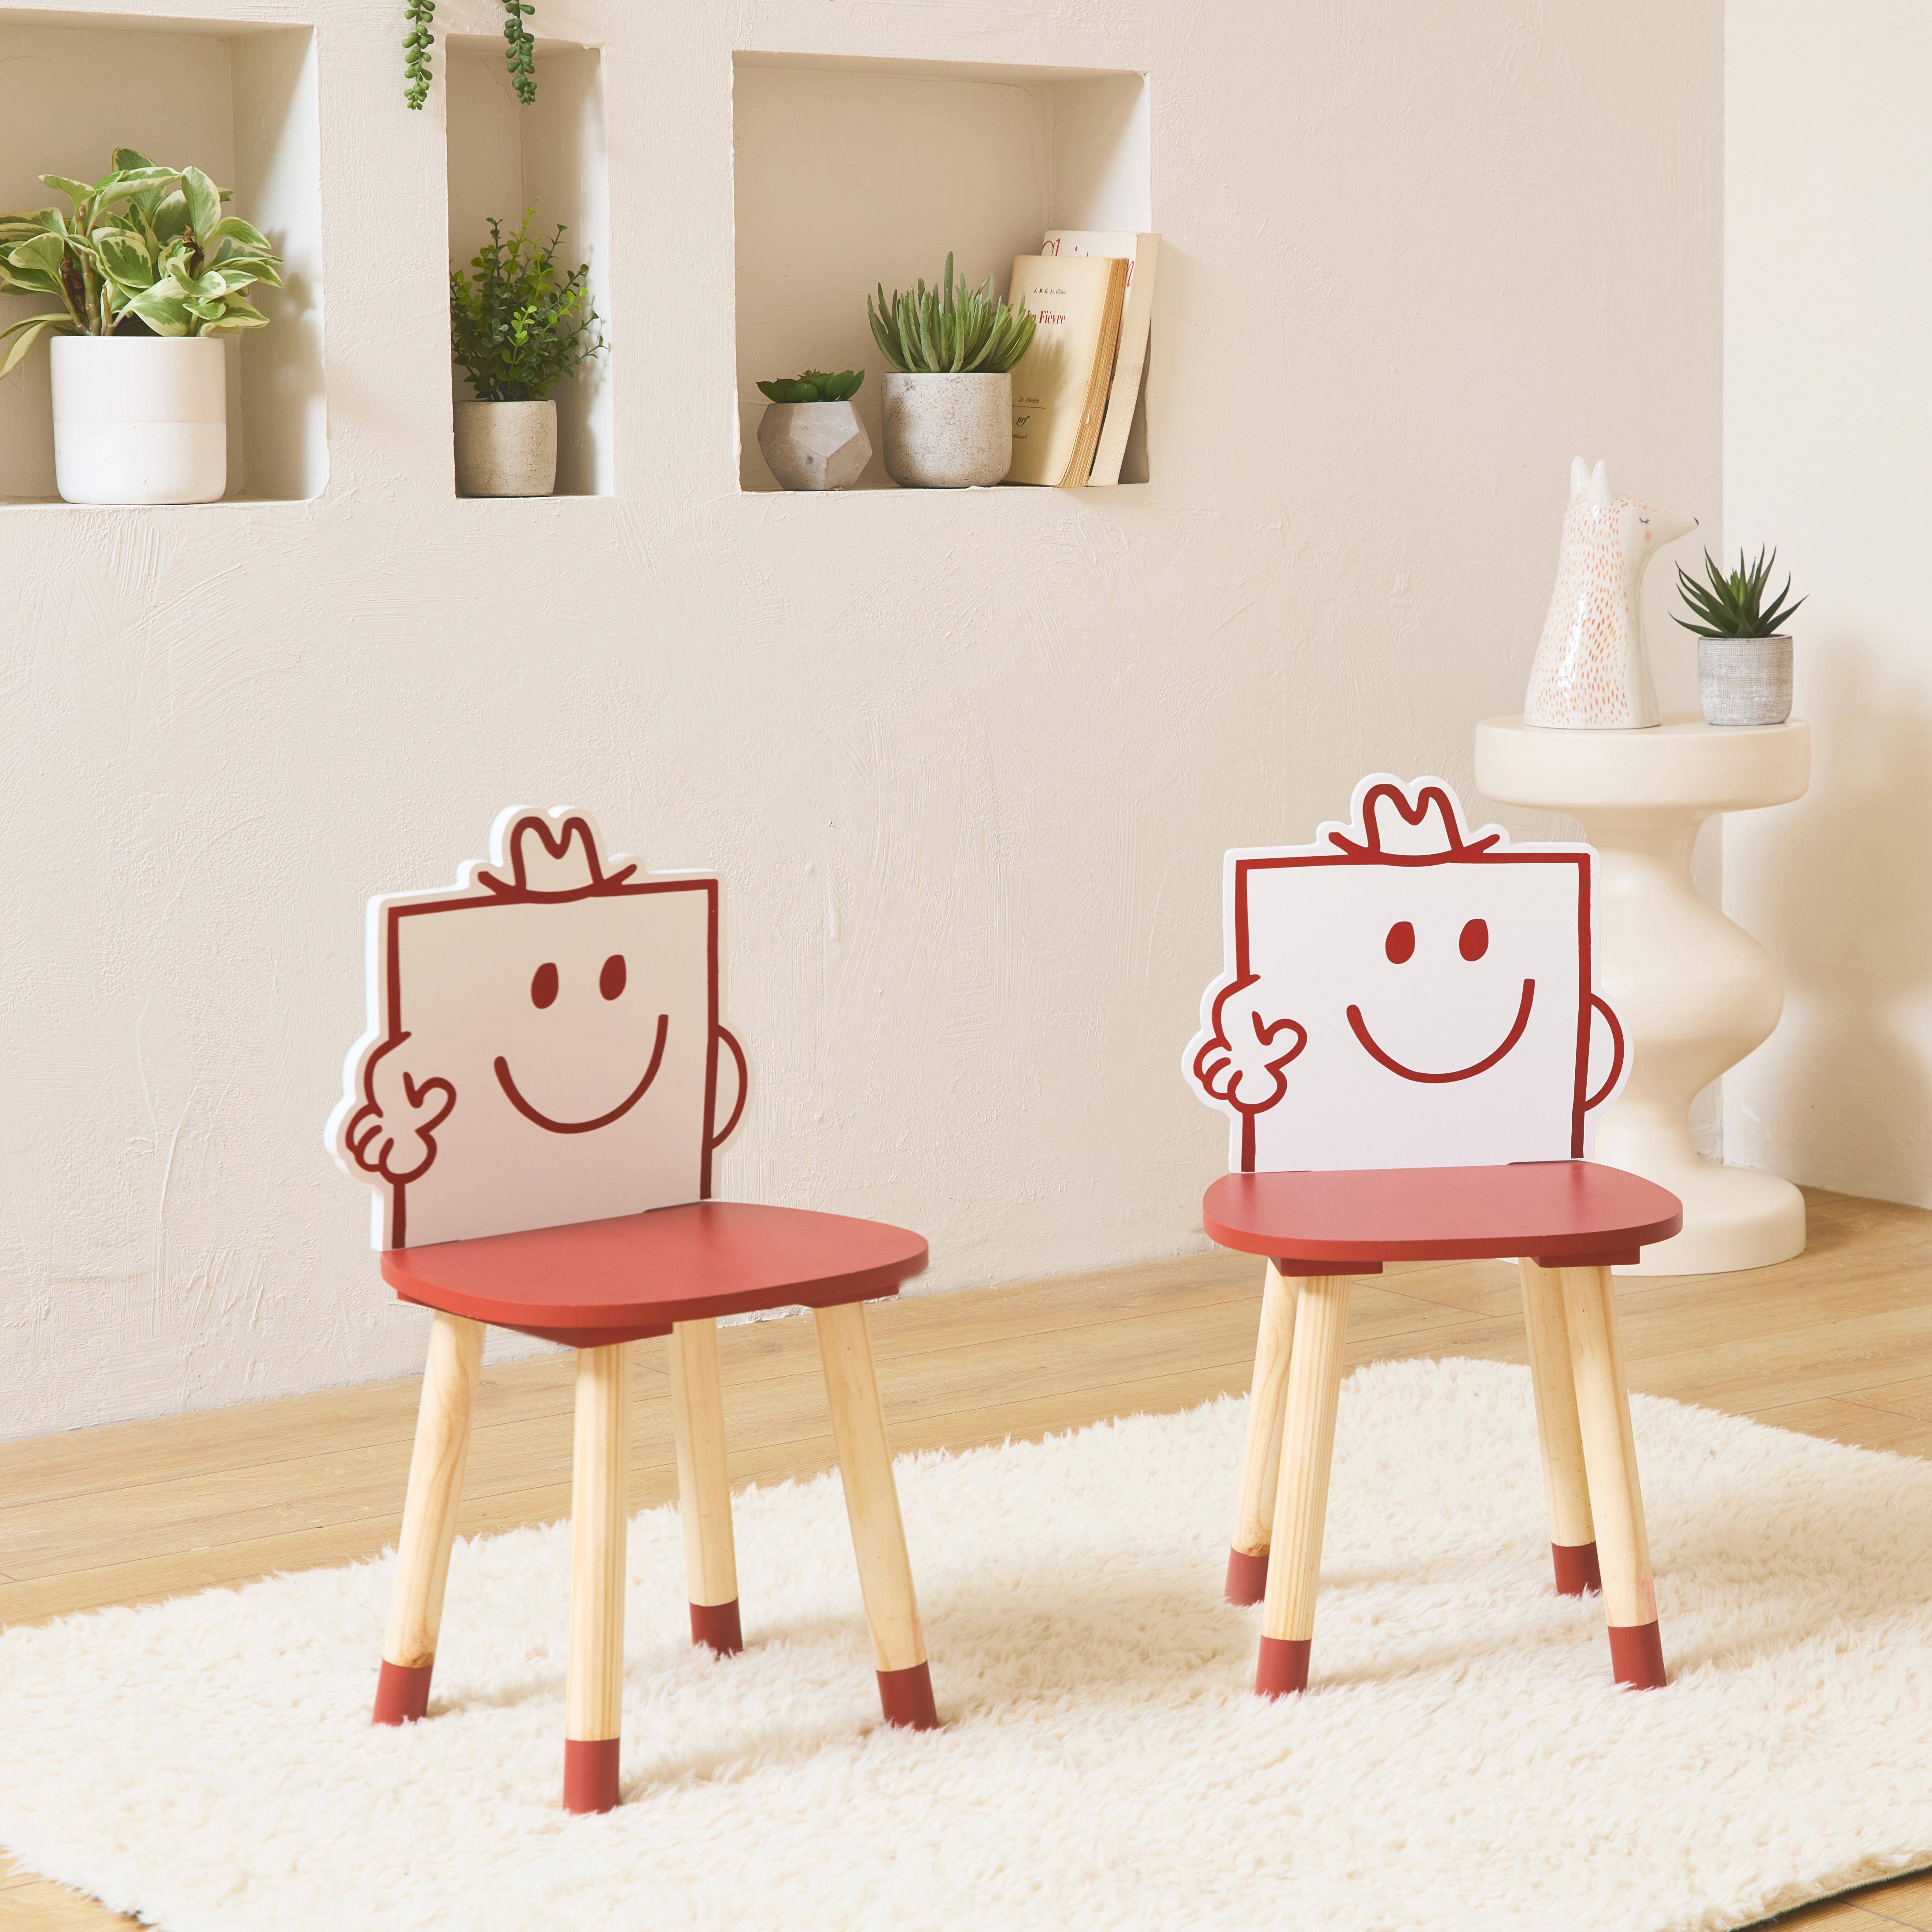 Set of 2 children's chairs, Mr. Men & Little Miss collection - Mr. Strong , Pierre, red,sweeek,Photo1